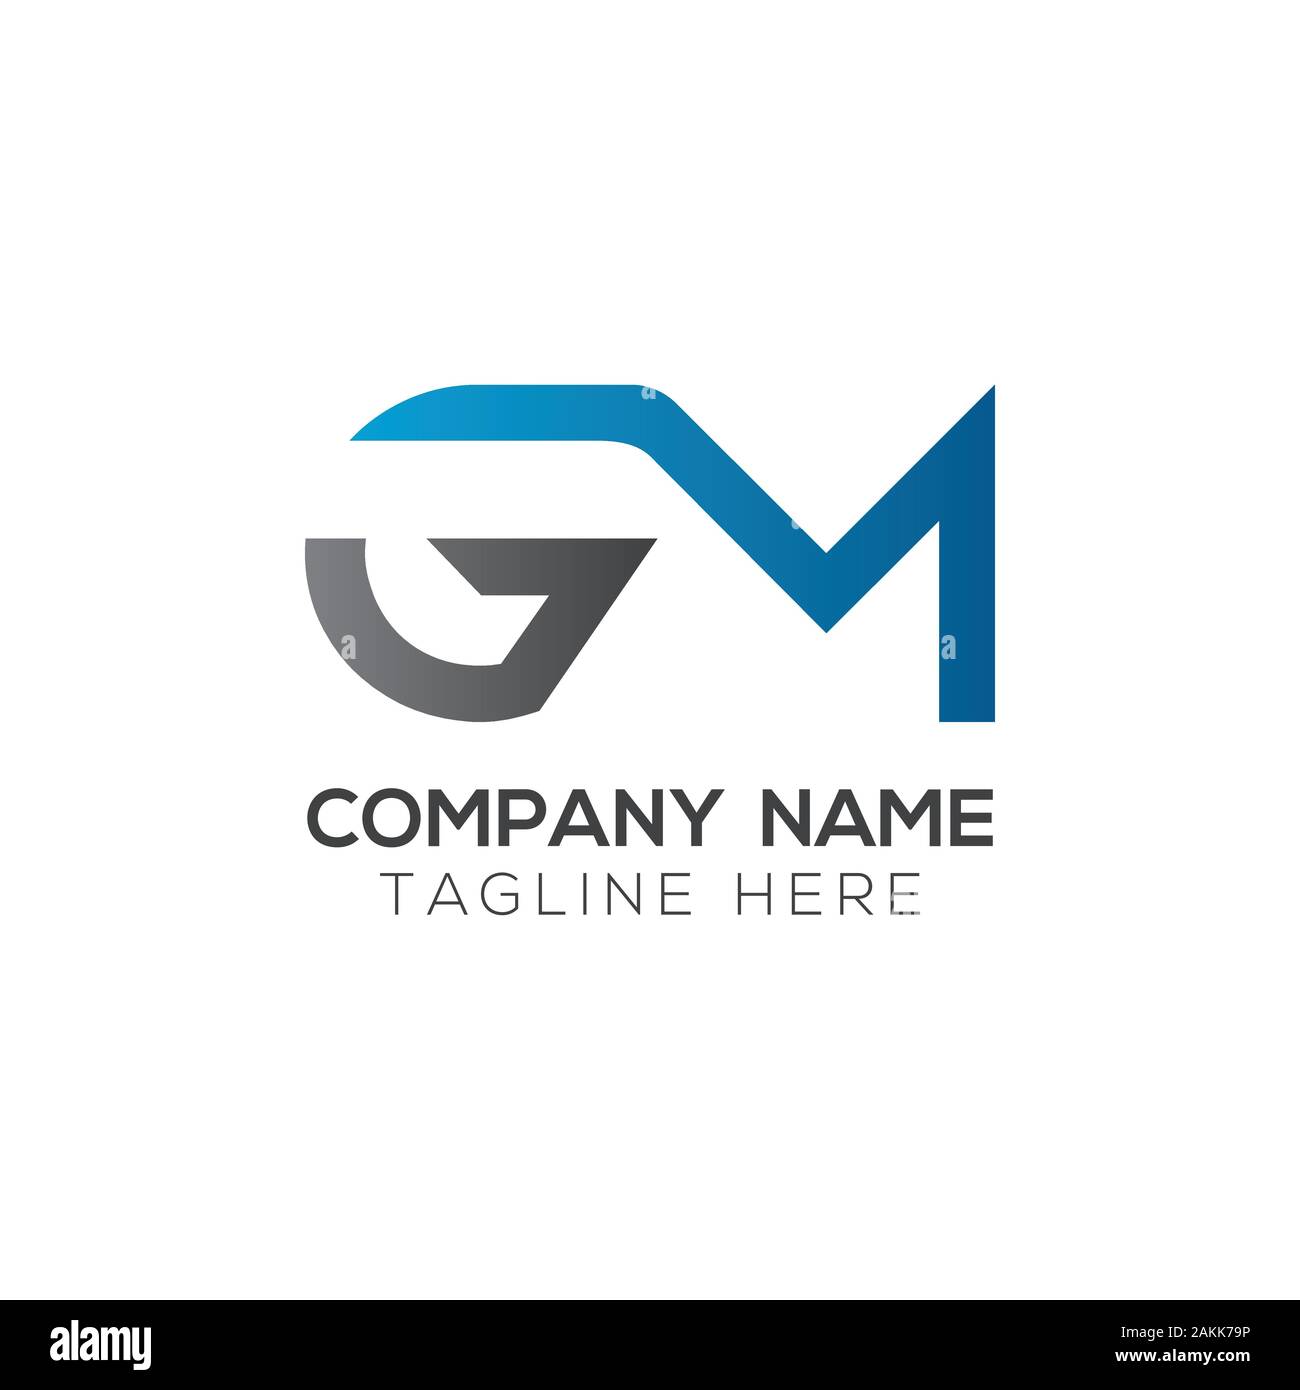 280,000+ Business GM Images  Business GM Stock Design Images Free